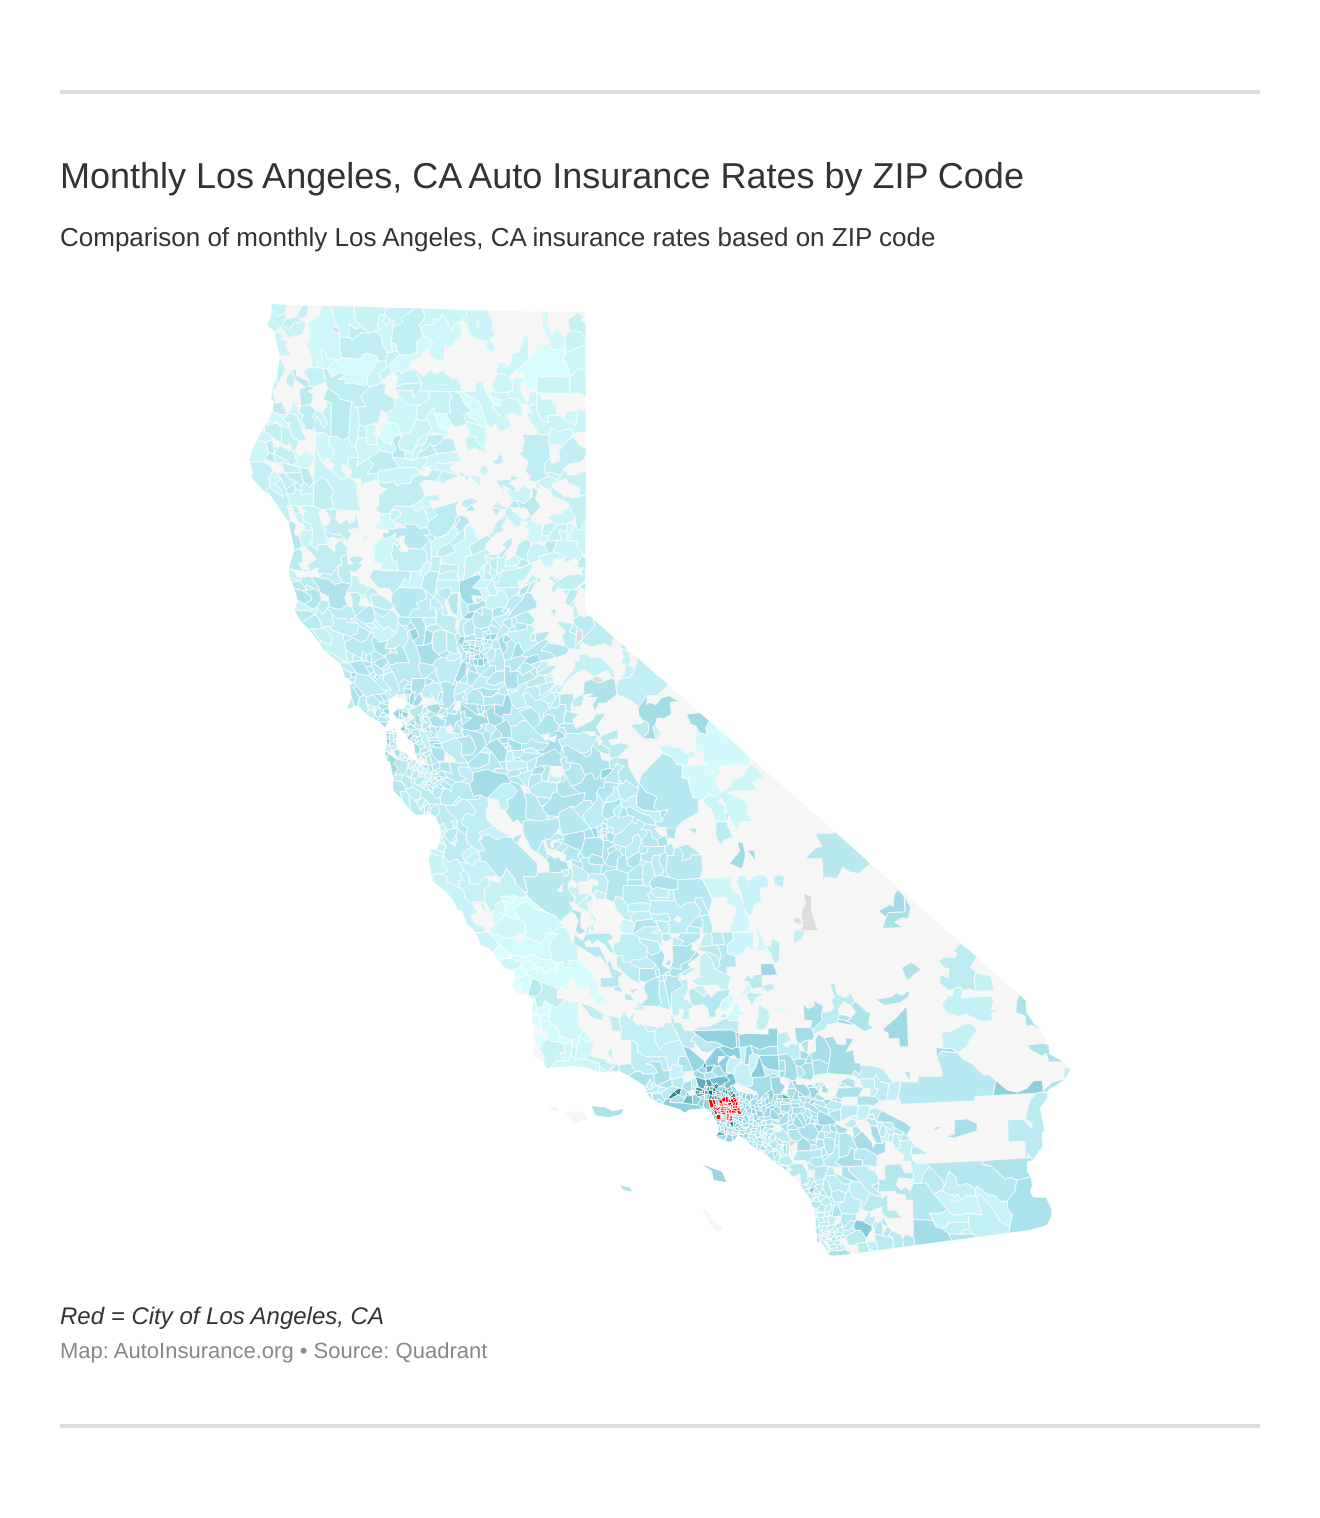 Monthly Los Angeles, CA Auto Insurance Rates by ZIP Code